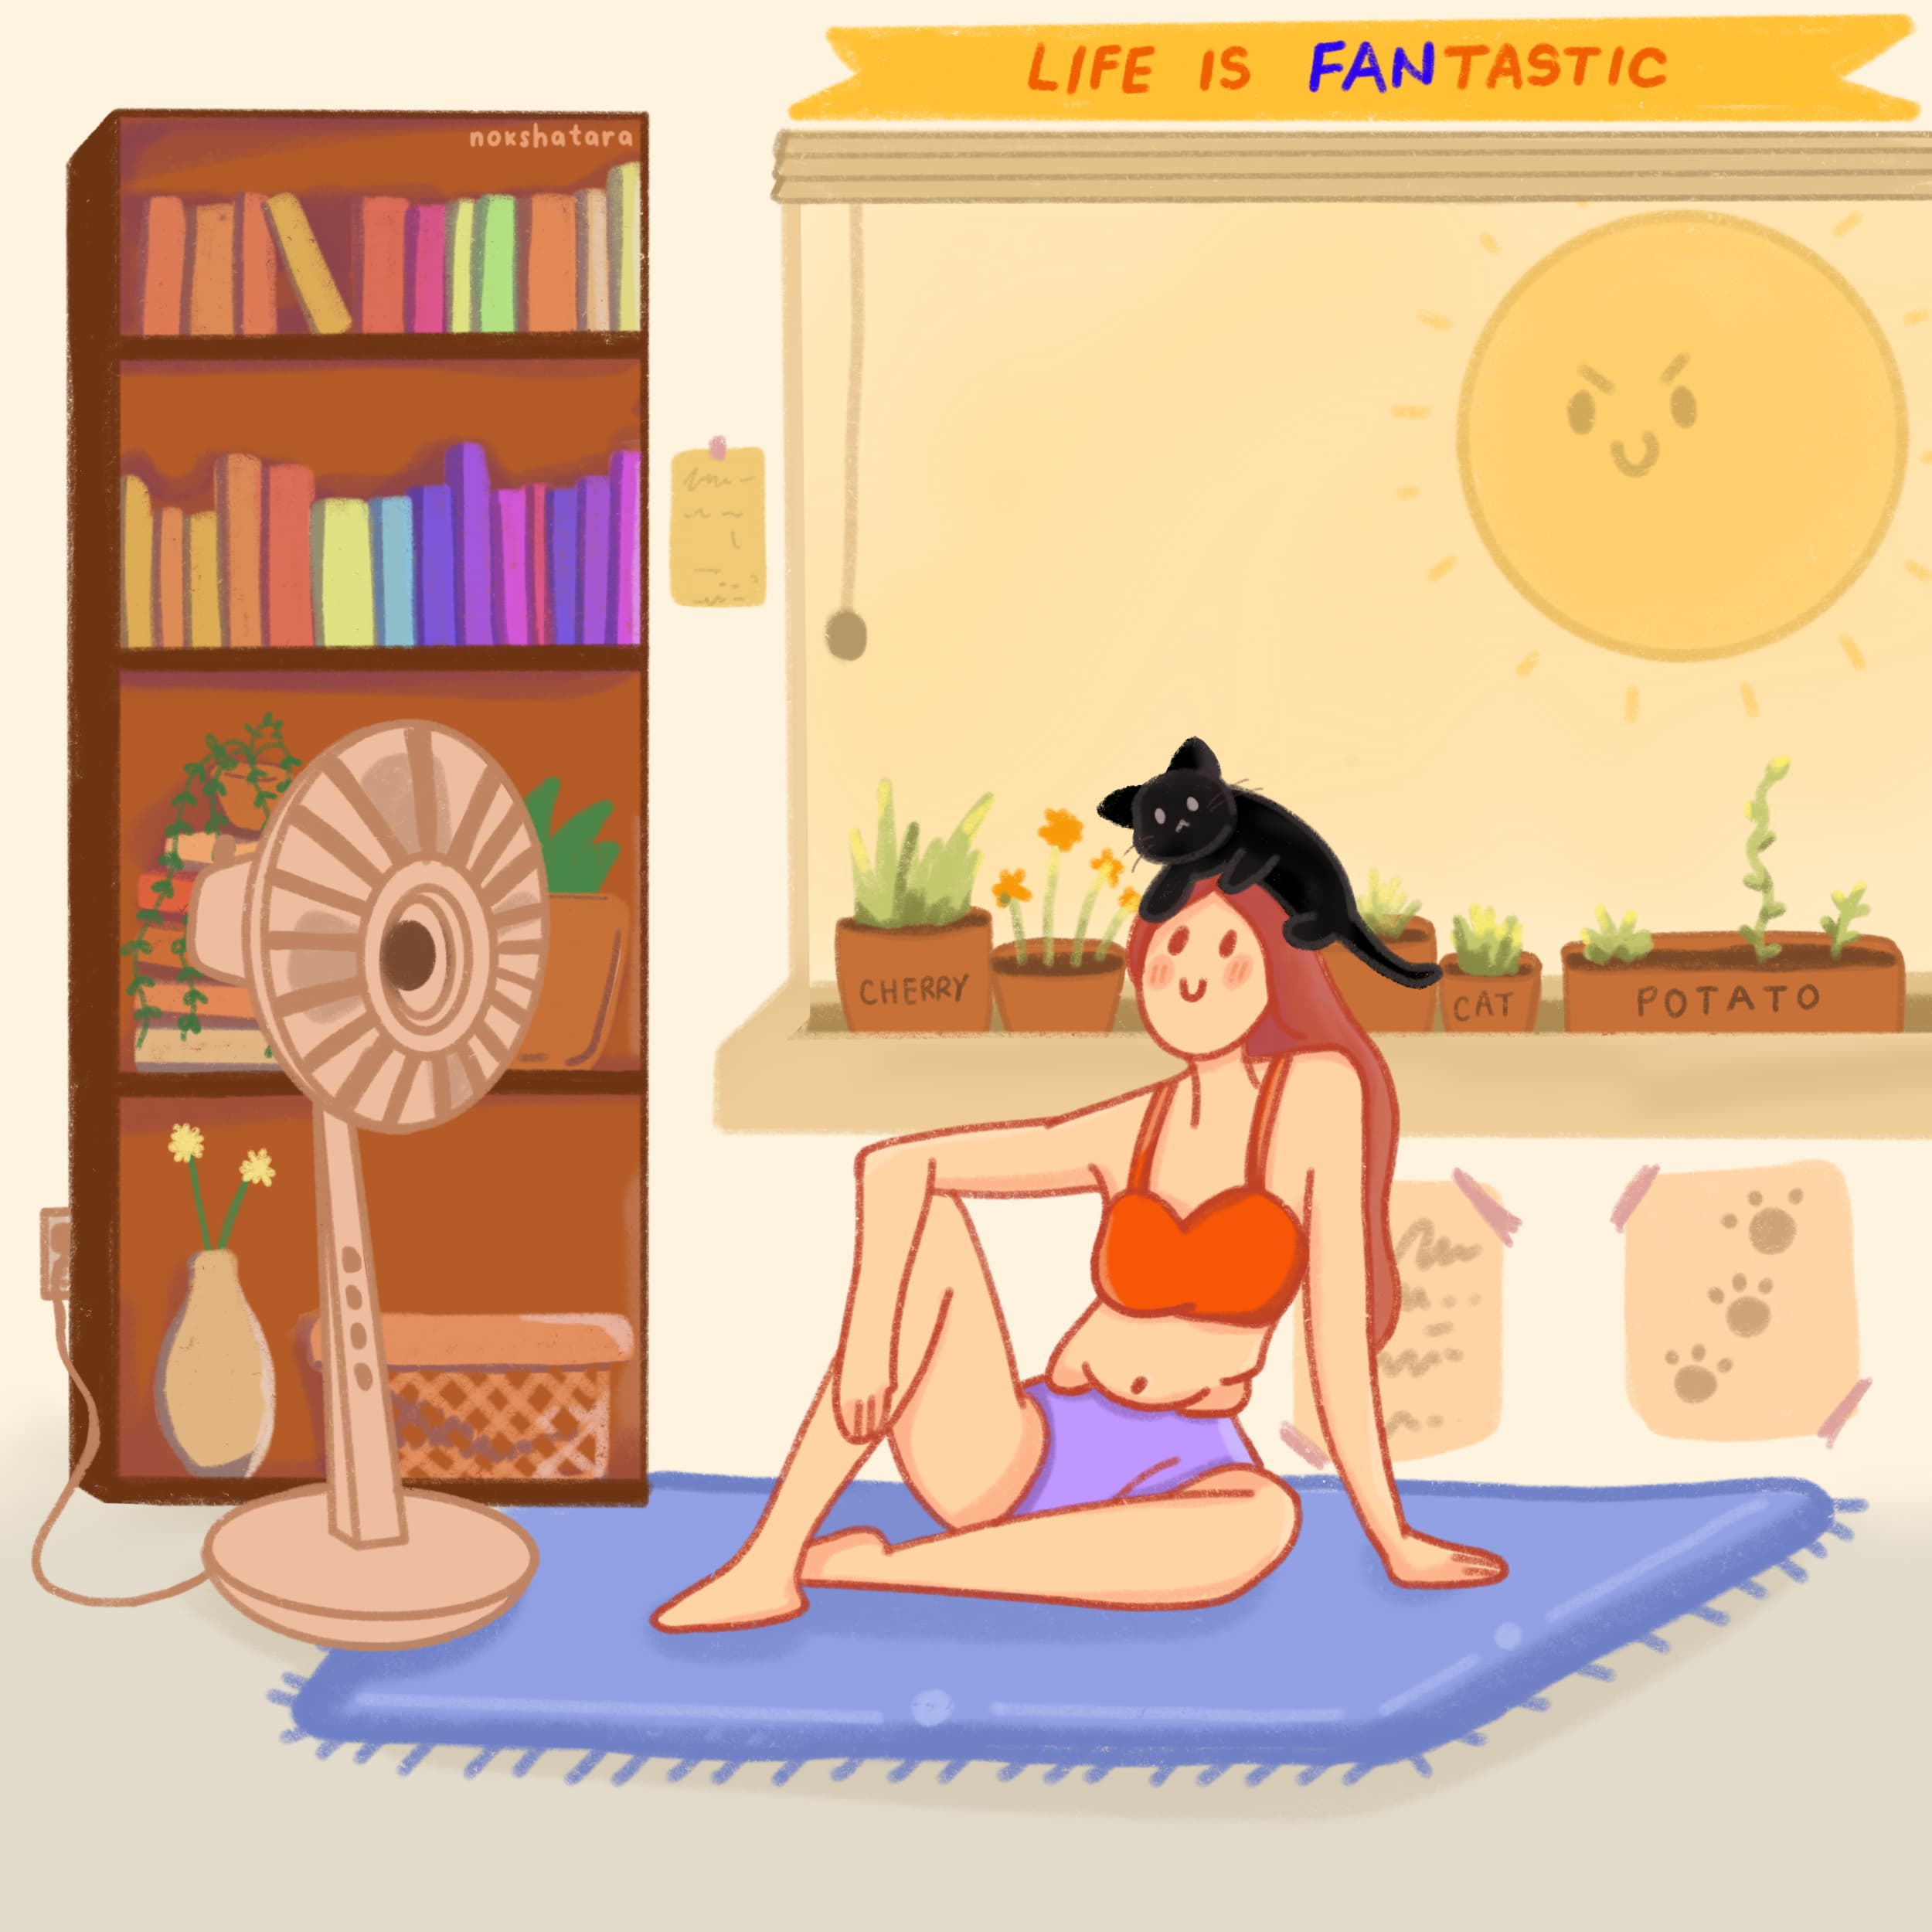 Illustration of a girl sitting in front of a fan on a hot summer day with a cat on her head